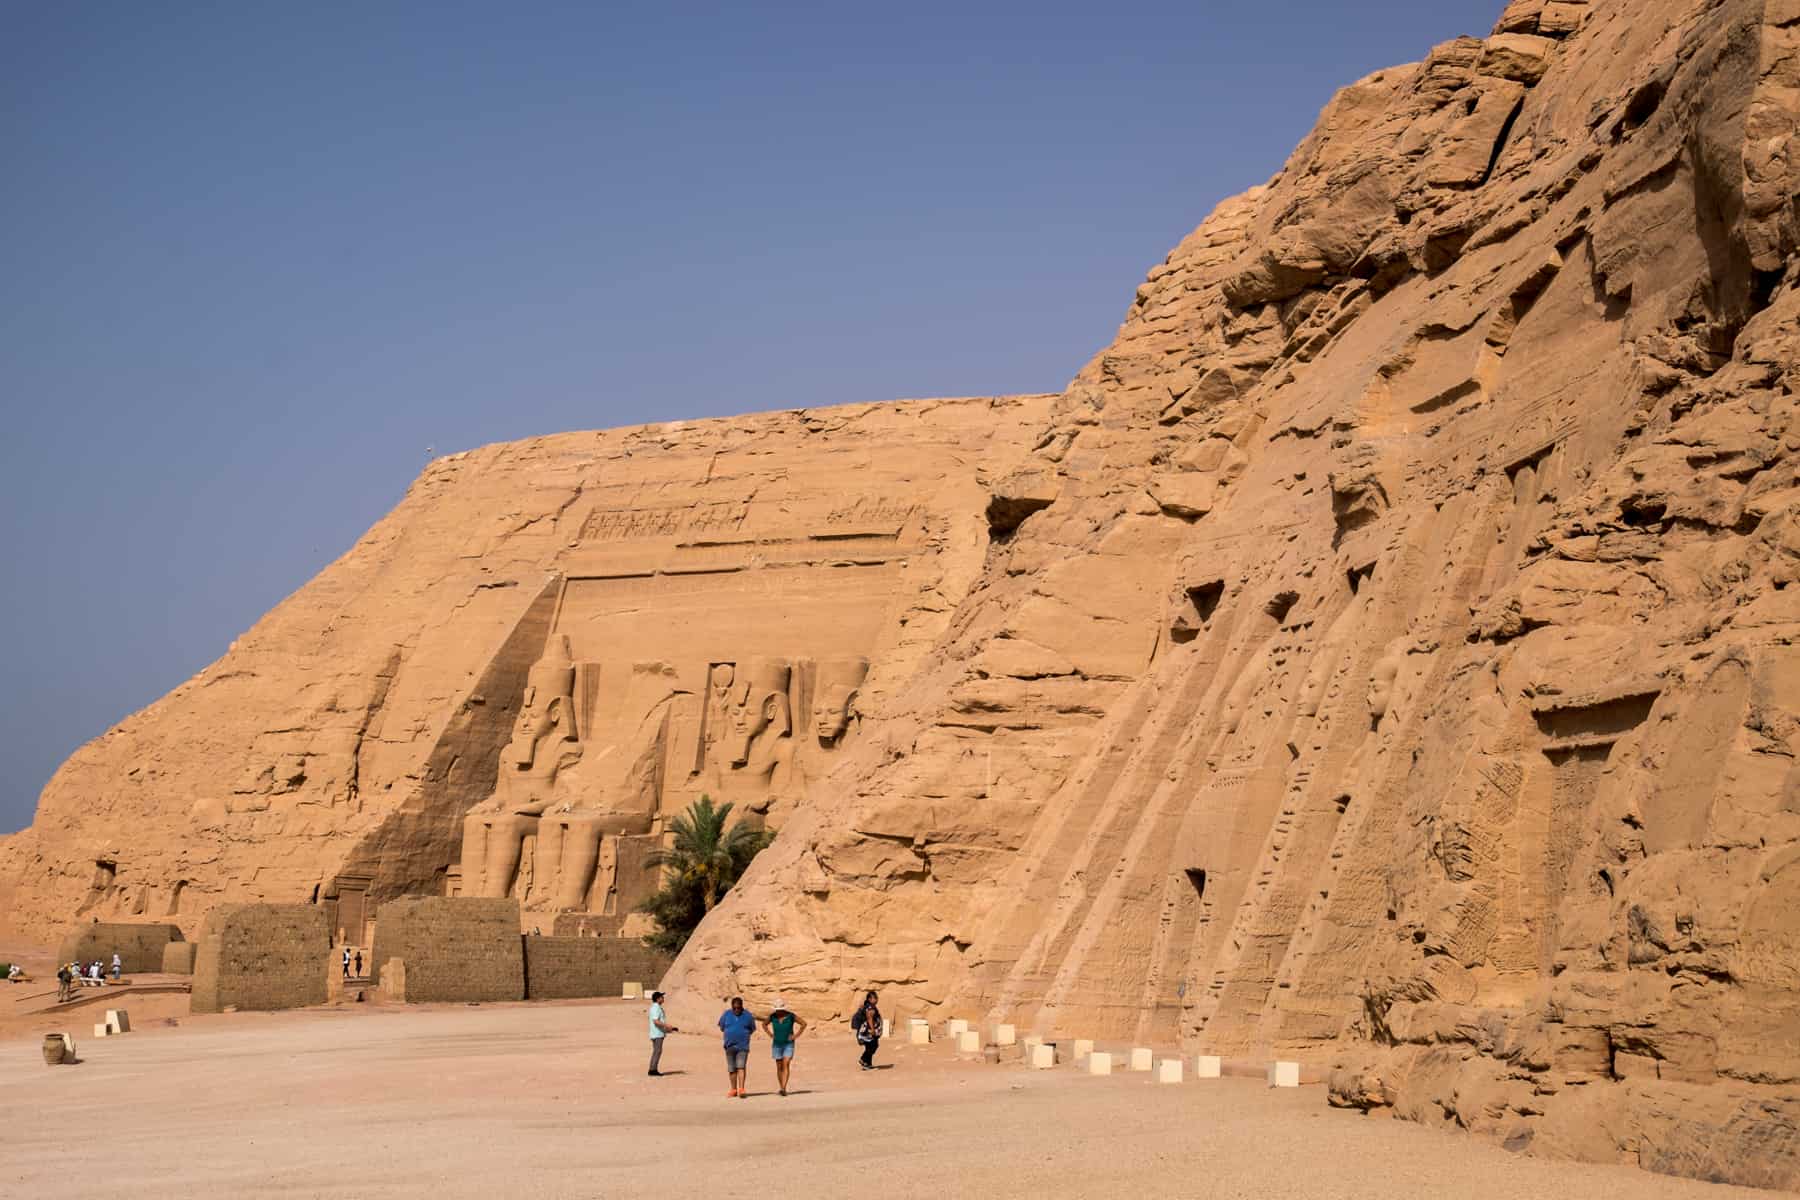 A wide shot of both mountain carved temples of Abu Simbel in Egypt, with statues and scripture carved into ochre mountain rocks